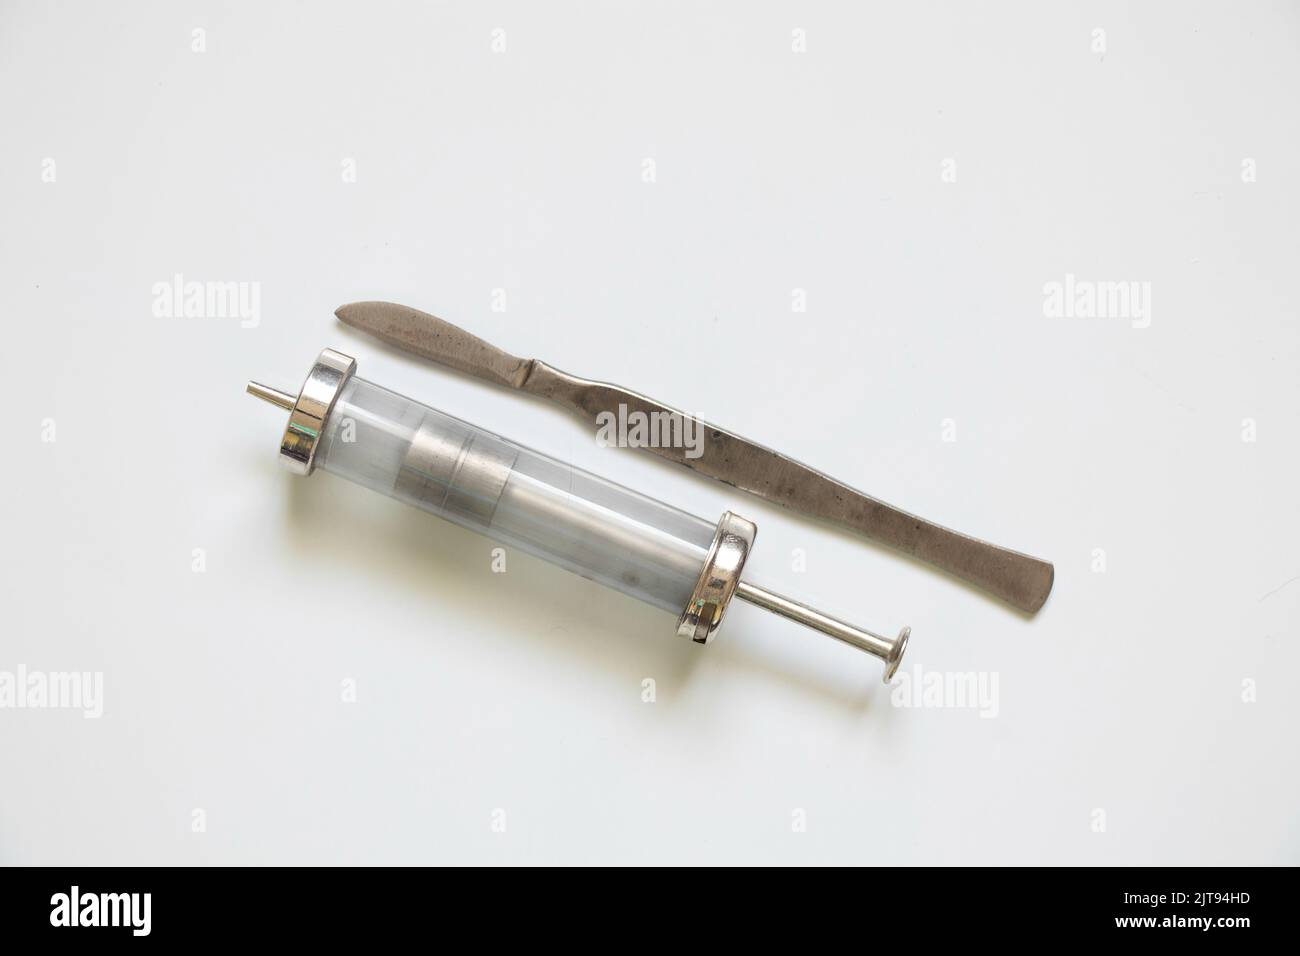 old reusable syringe and scalpel on a white background, medical equipment Stock Photo